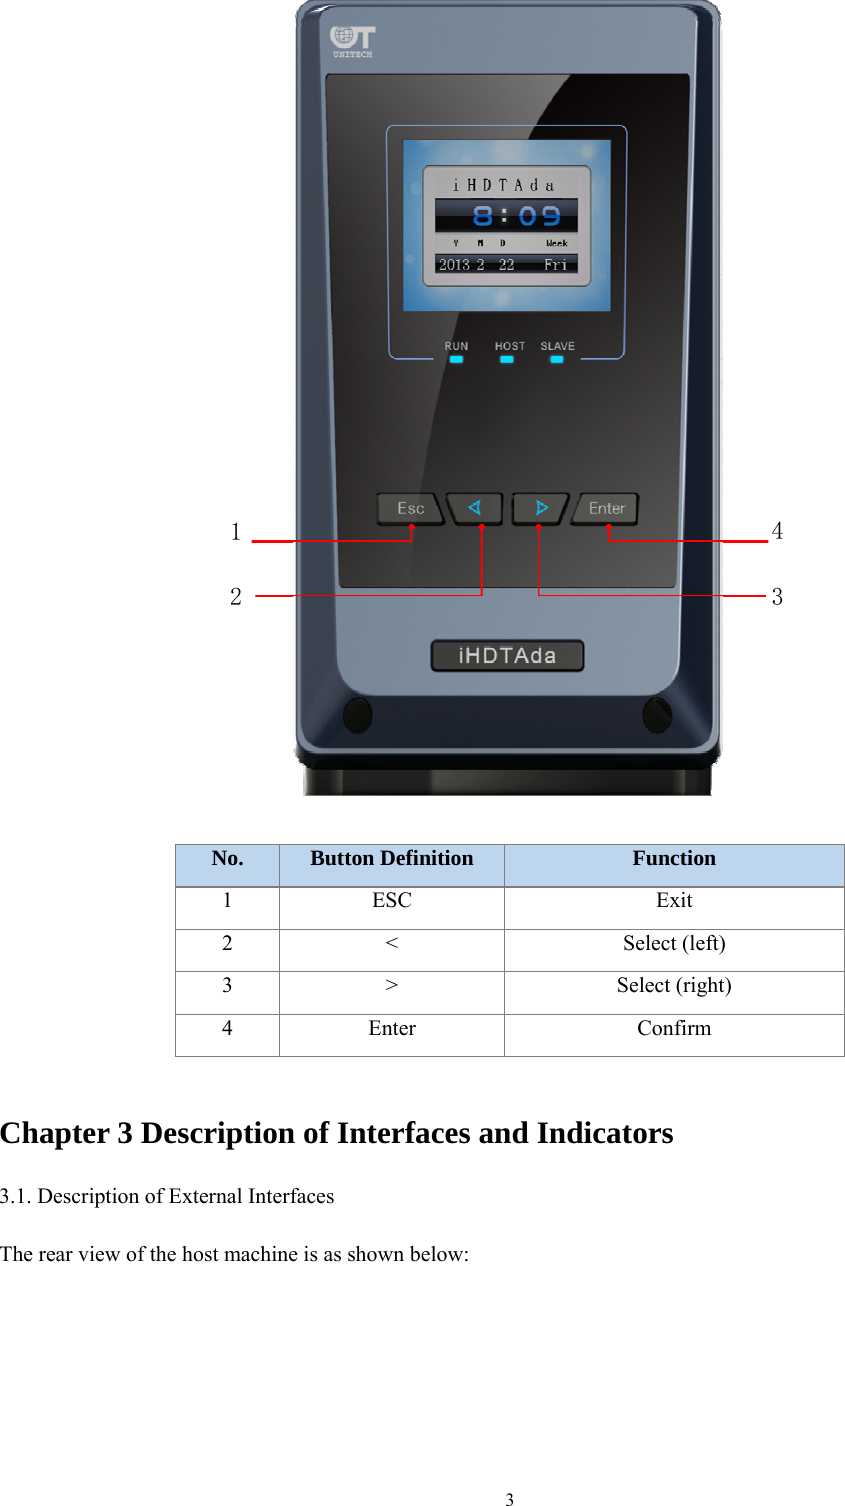 3  No.  Button Definition  Function 1 ESC  Exit 2 &lt;  Select (left) 3 &gt;  Select (right) 4 Enter  Confirm  Chapter 3 Description of Interfaces and Indicators 3.1. Description of External Interfaces The rear view of the host machine is as shown below: 1  2 4  3 